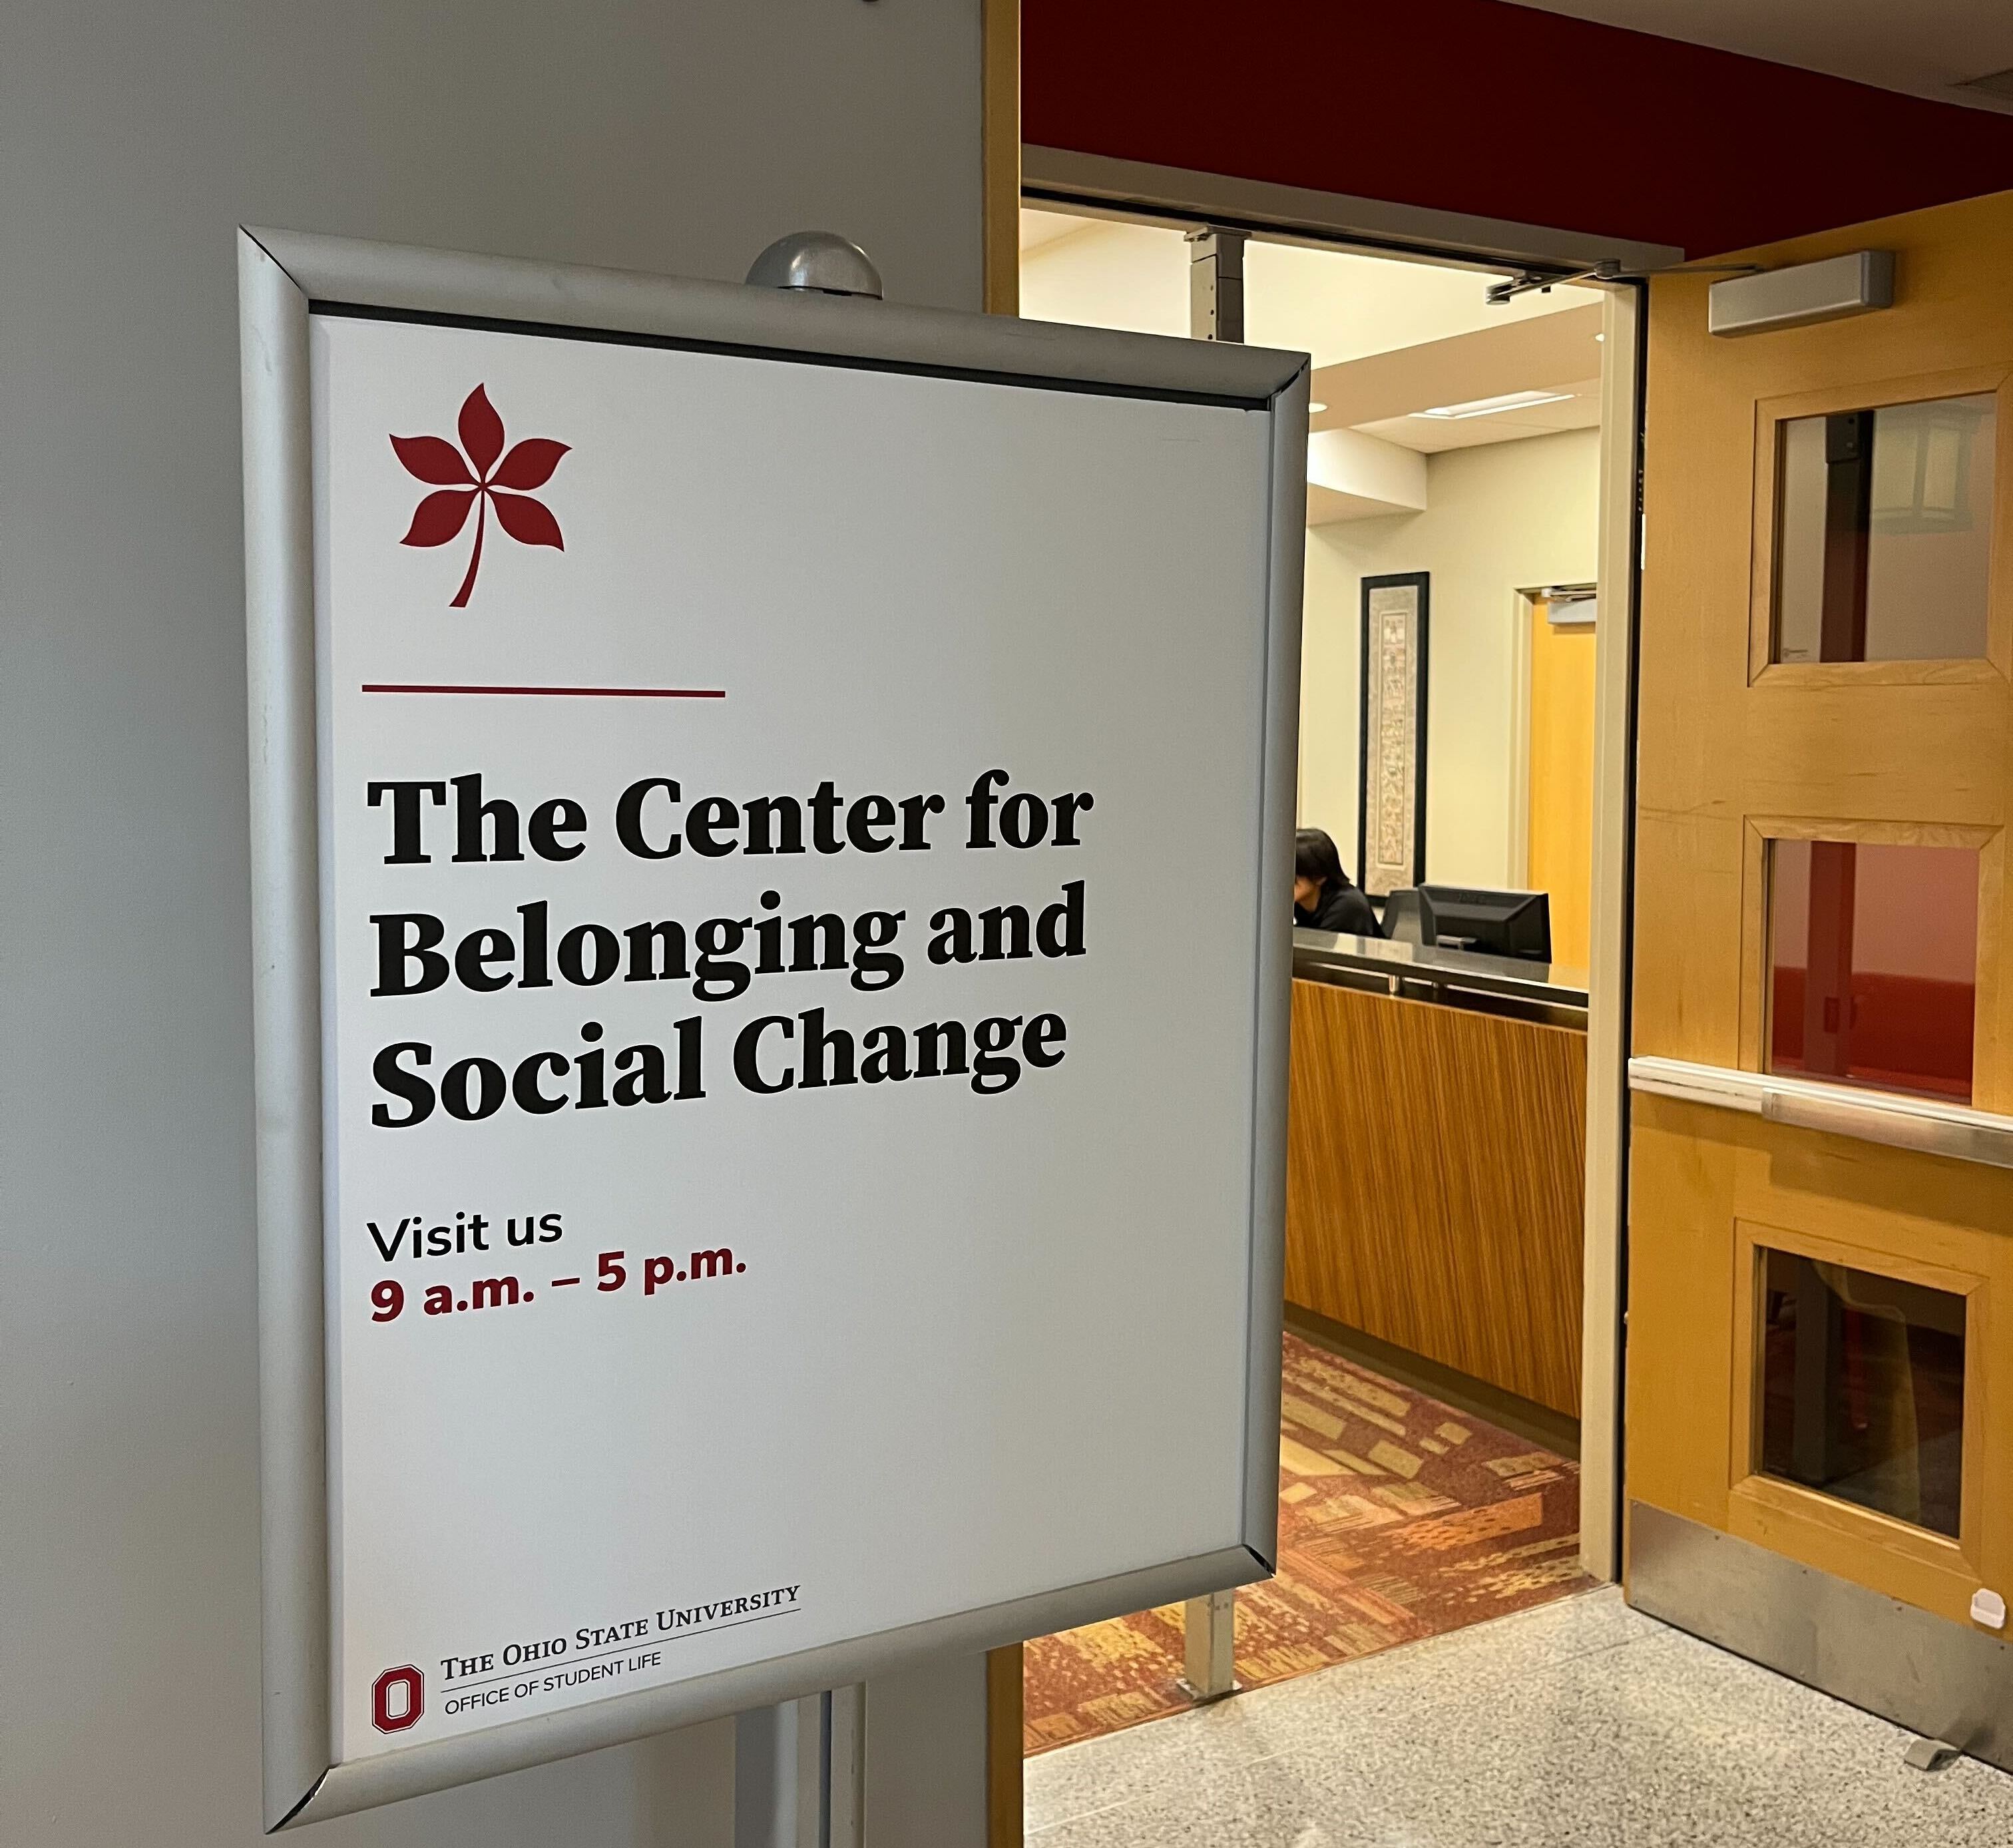 Center for Belonging and Social Change, located on the first floor of the Ohio Union